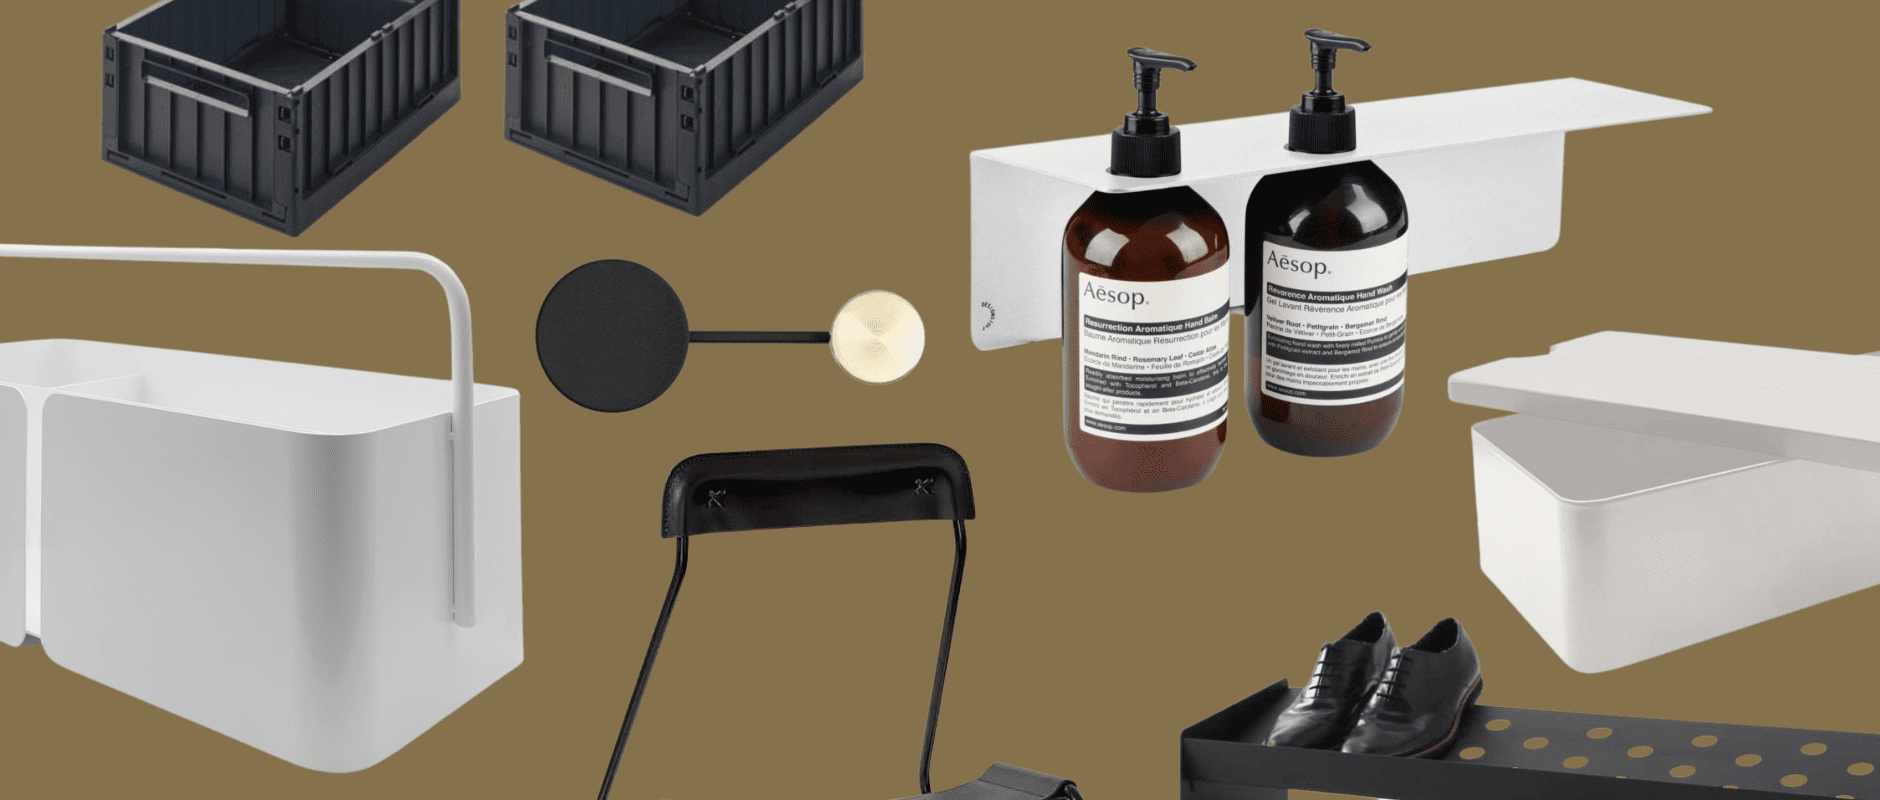 A collage of home organisation essentials on a khaki background. The products featured include the DESIGNSTUFF desk caddy, LIEWOOD's Weston storage crates, MENU's Afteroom Coat Rack, MINIM's Sling Guitar Stand, the DESIGNSTUFF Shelf with Soap Dispenser Holders, BEN-TOVIM DESIGNS Shoe Rack, and DESIGNSTUFF's Storage Box